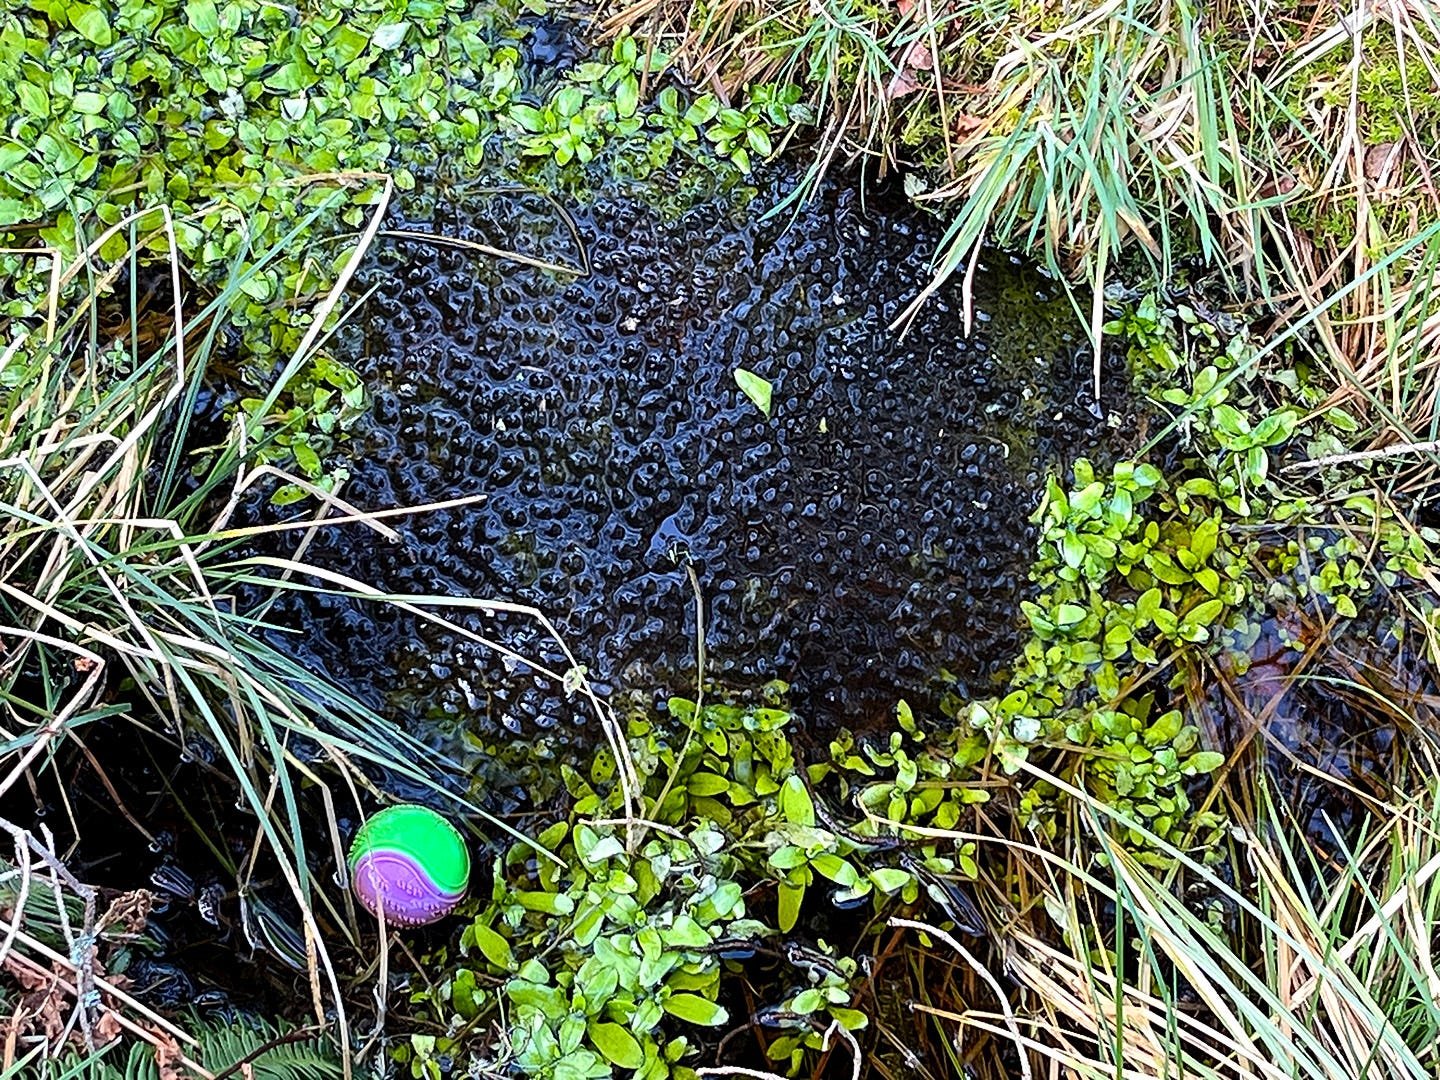 Frogspawn in a grass lined ditch is juxtaposed with a lost purple and green ball